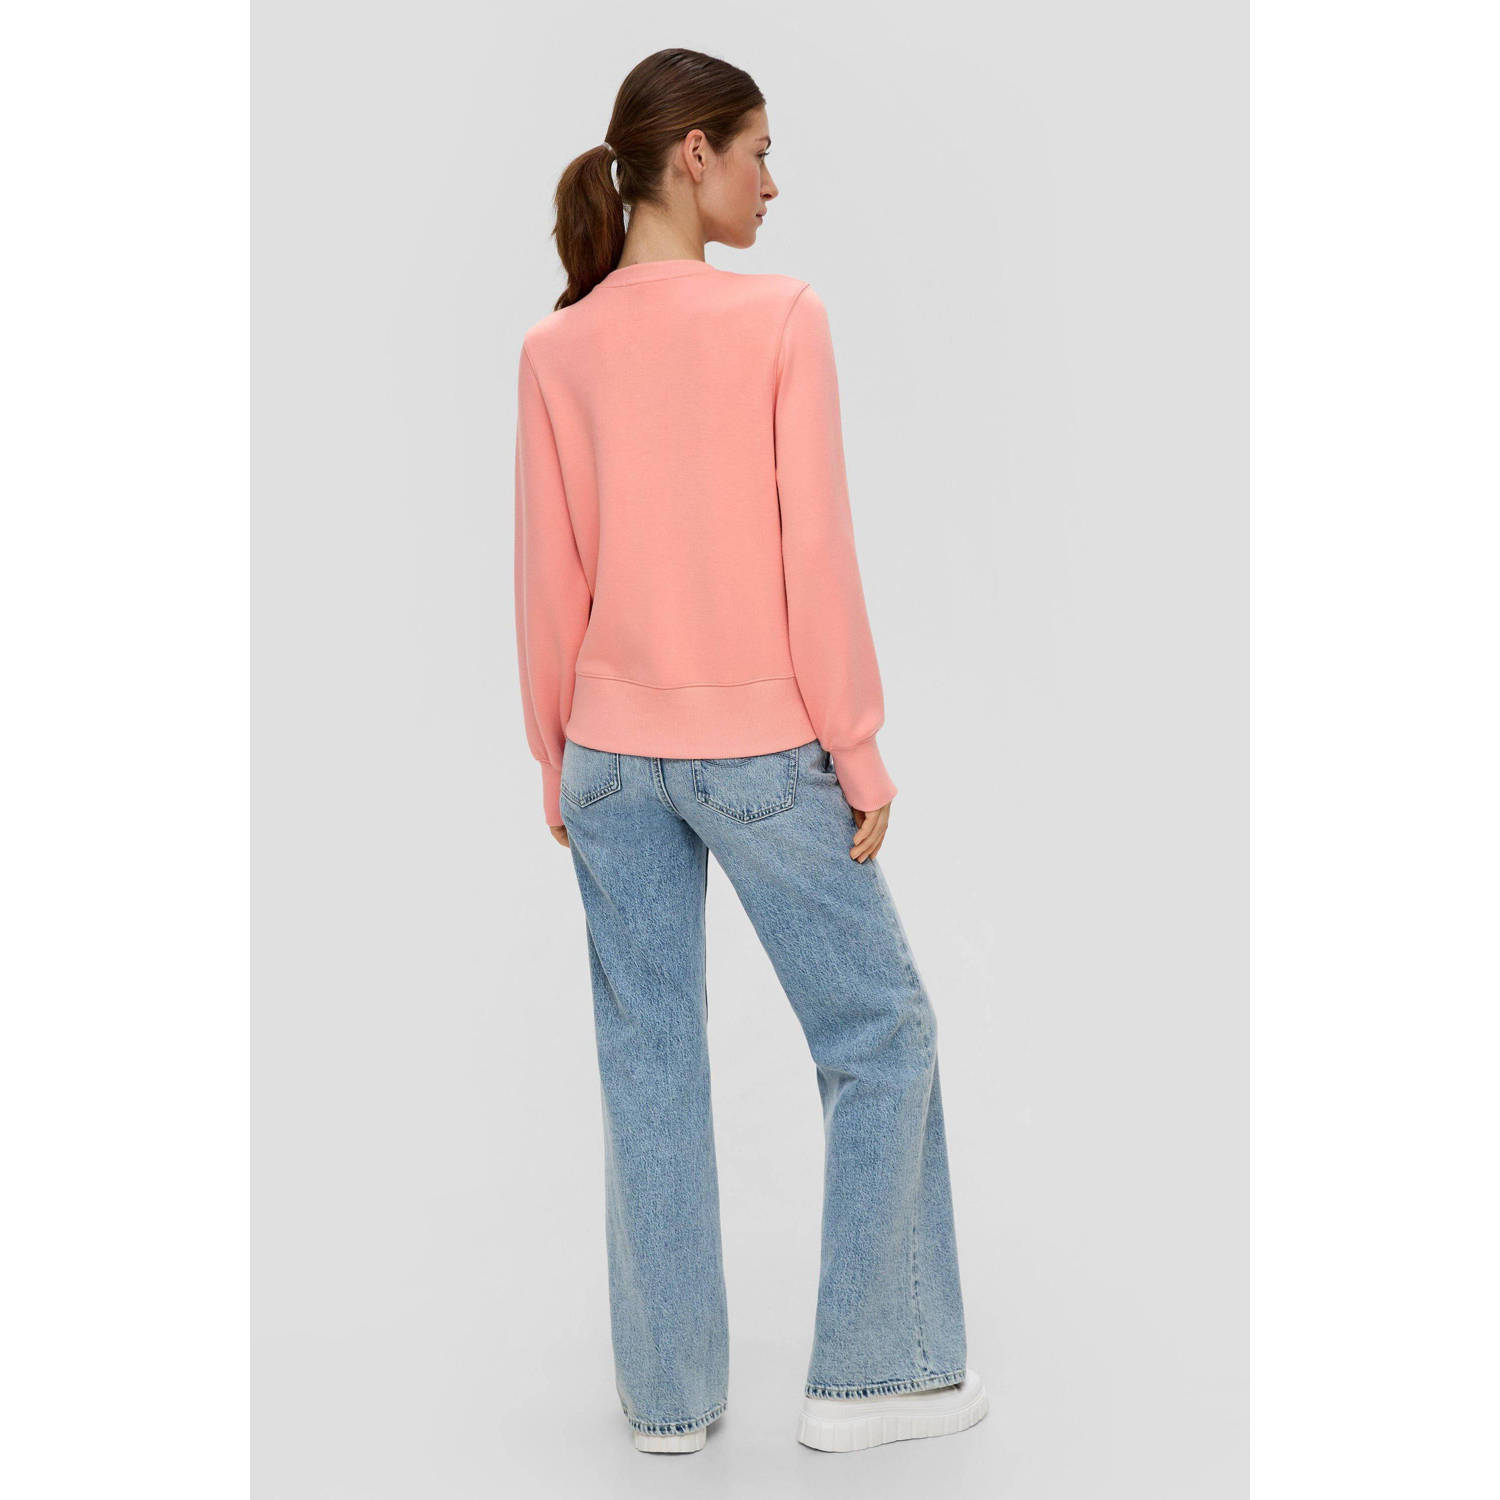 Q S by s.Oliver sweater zalm